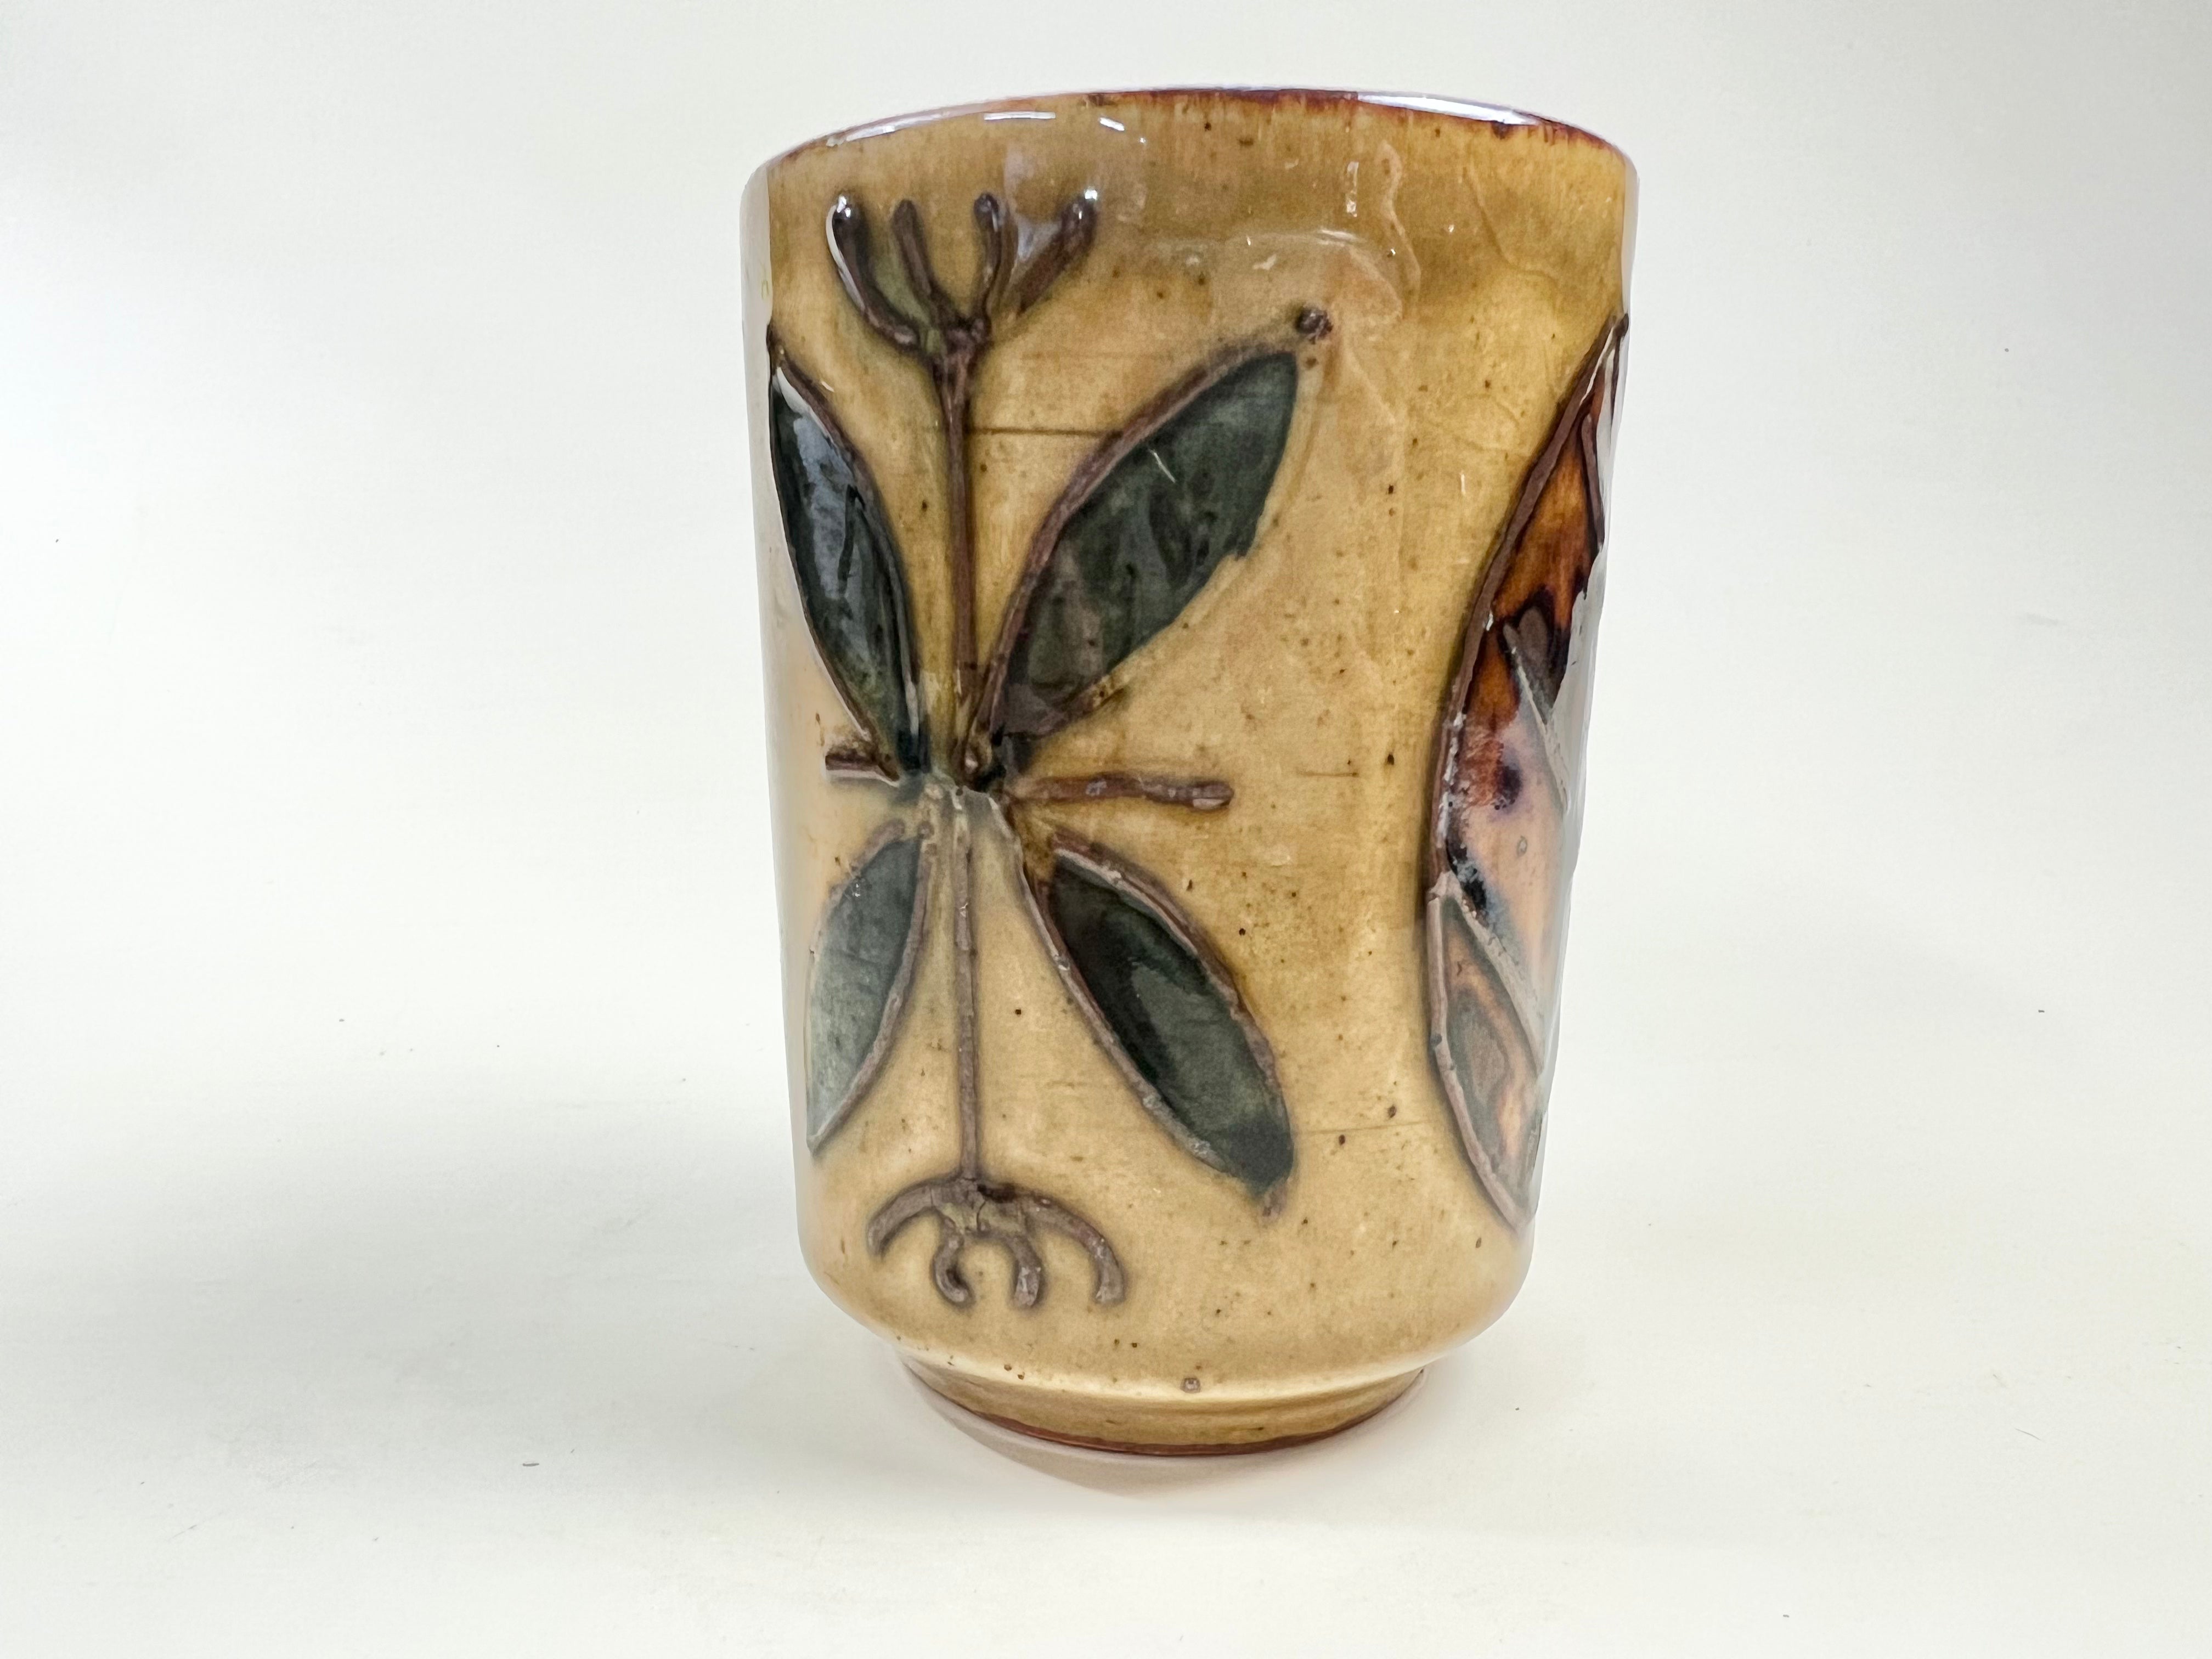 Small Glazed Pottery Vessel with Leaves Design